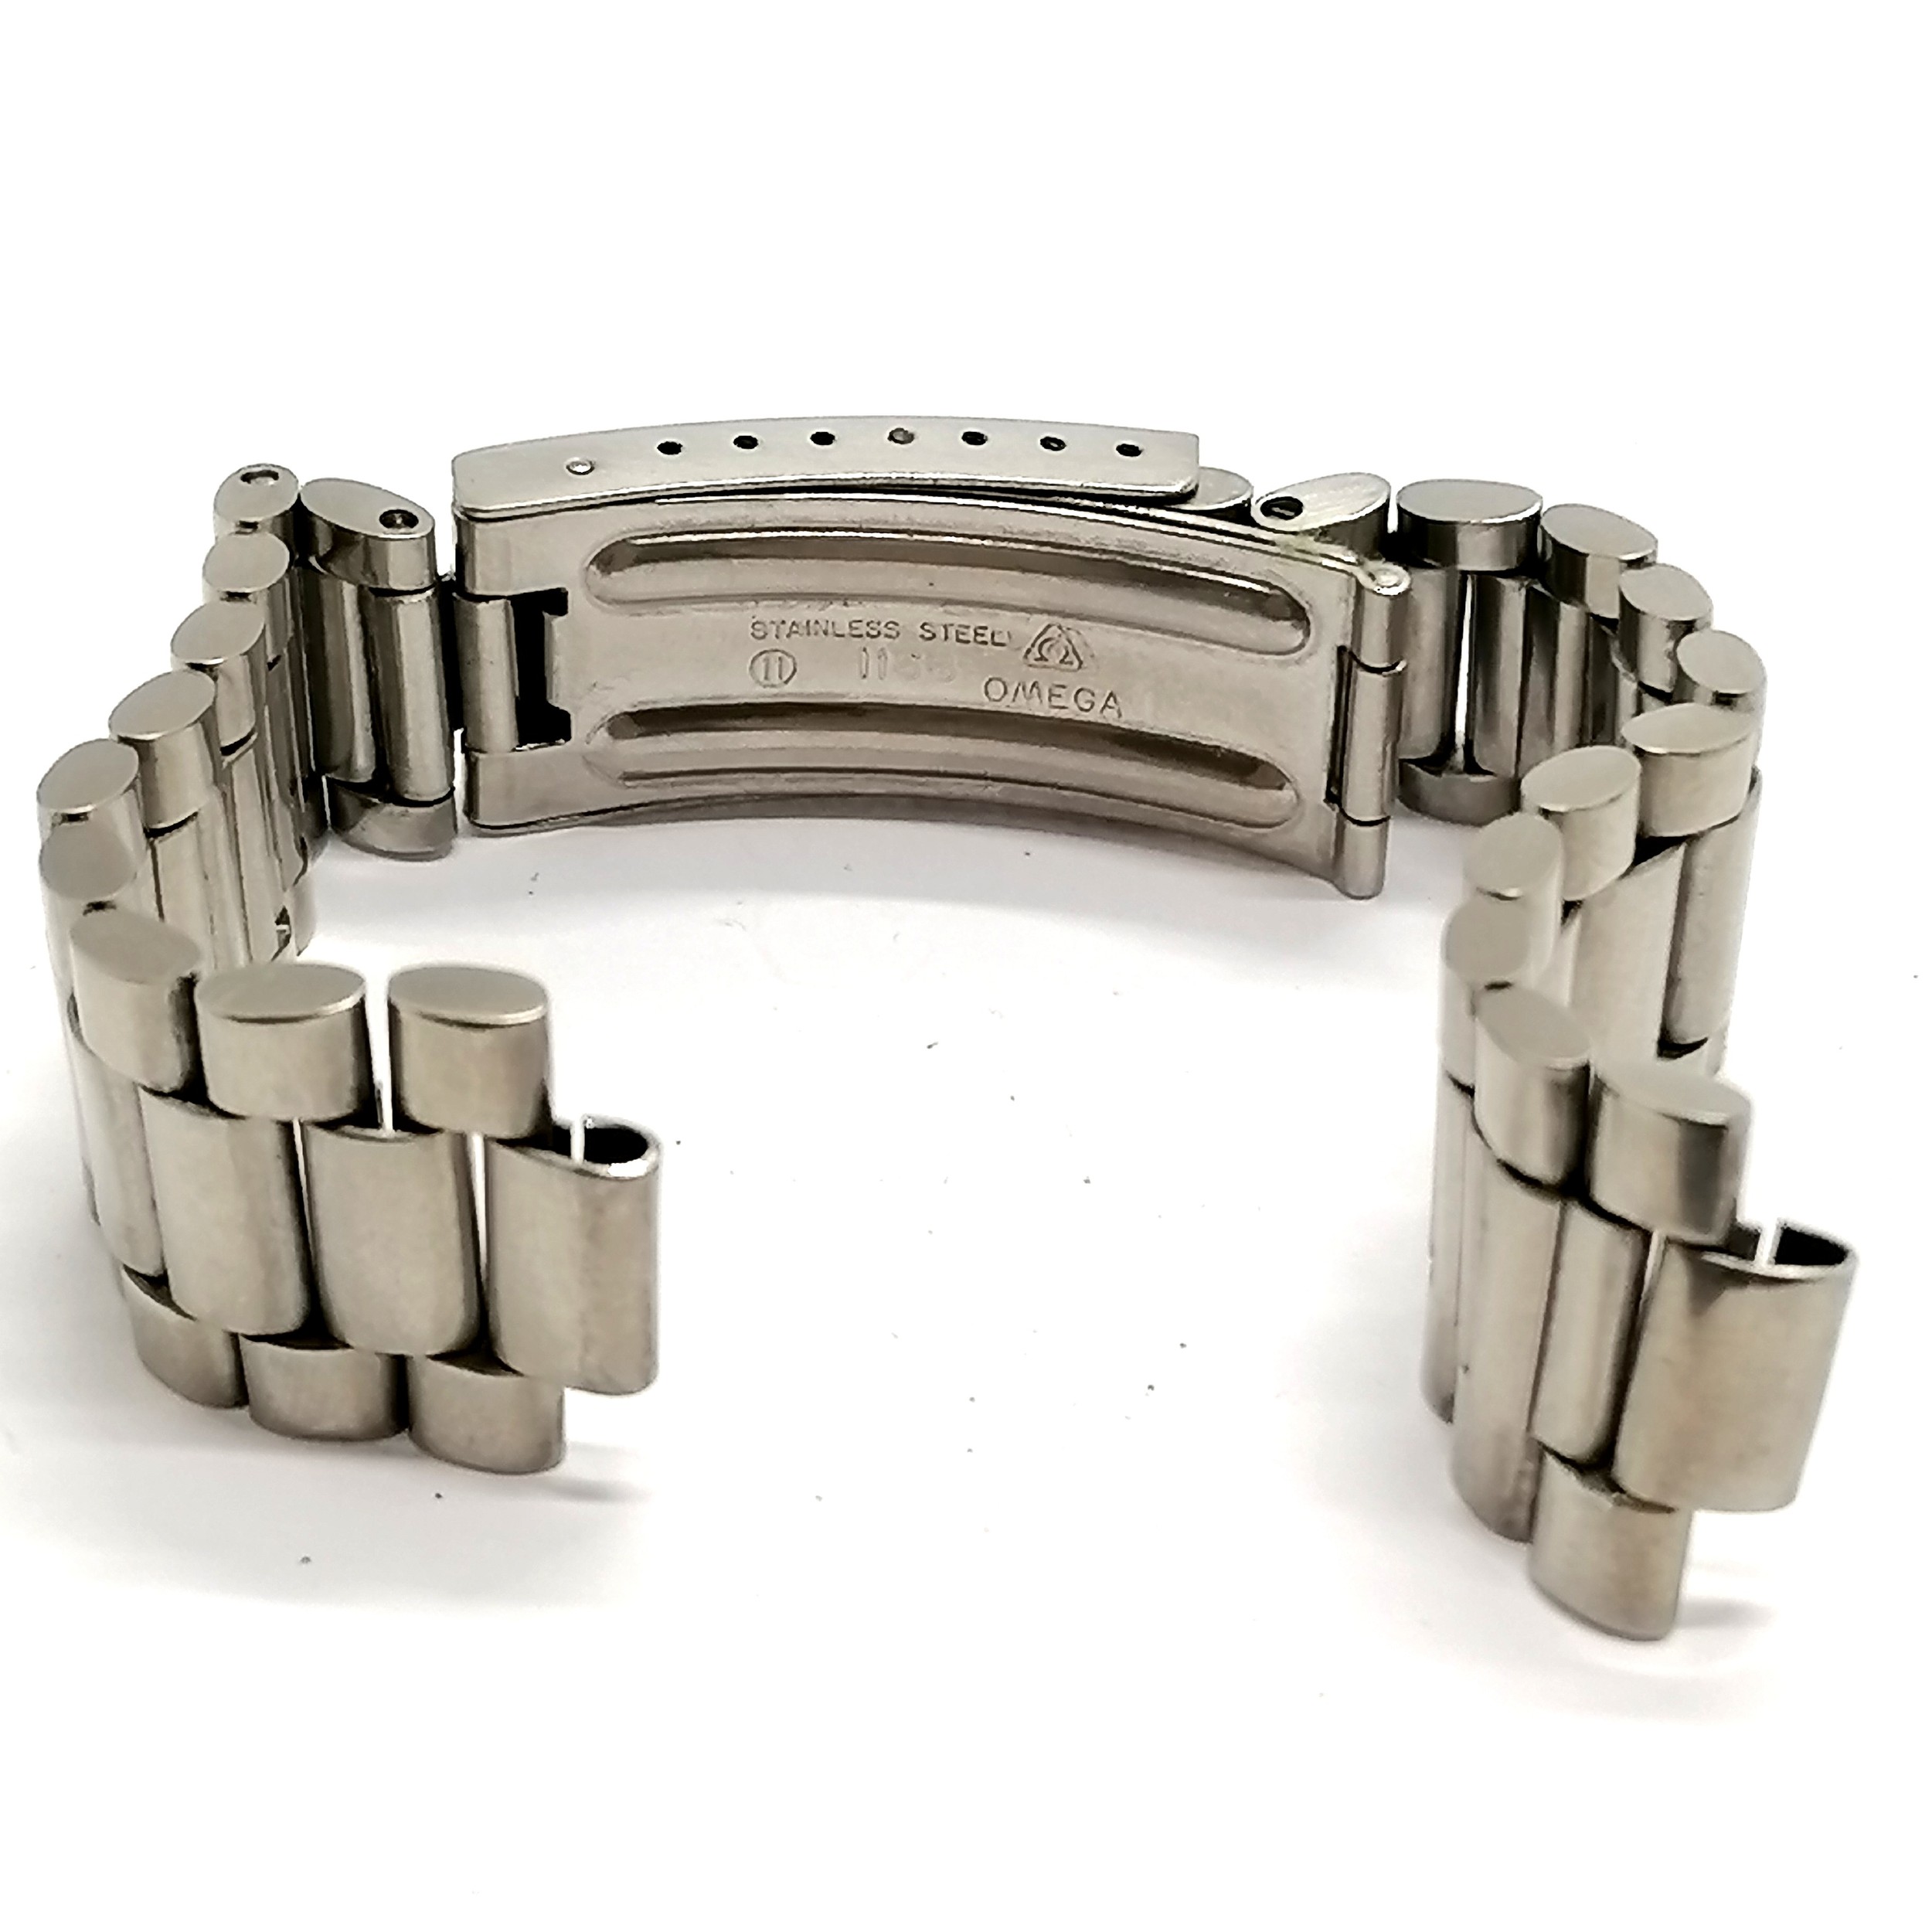 Omega stainless steel watch bracelet #1168 to clasp - open length 23cm - Image 2 of 2